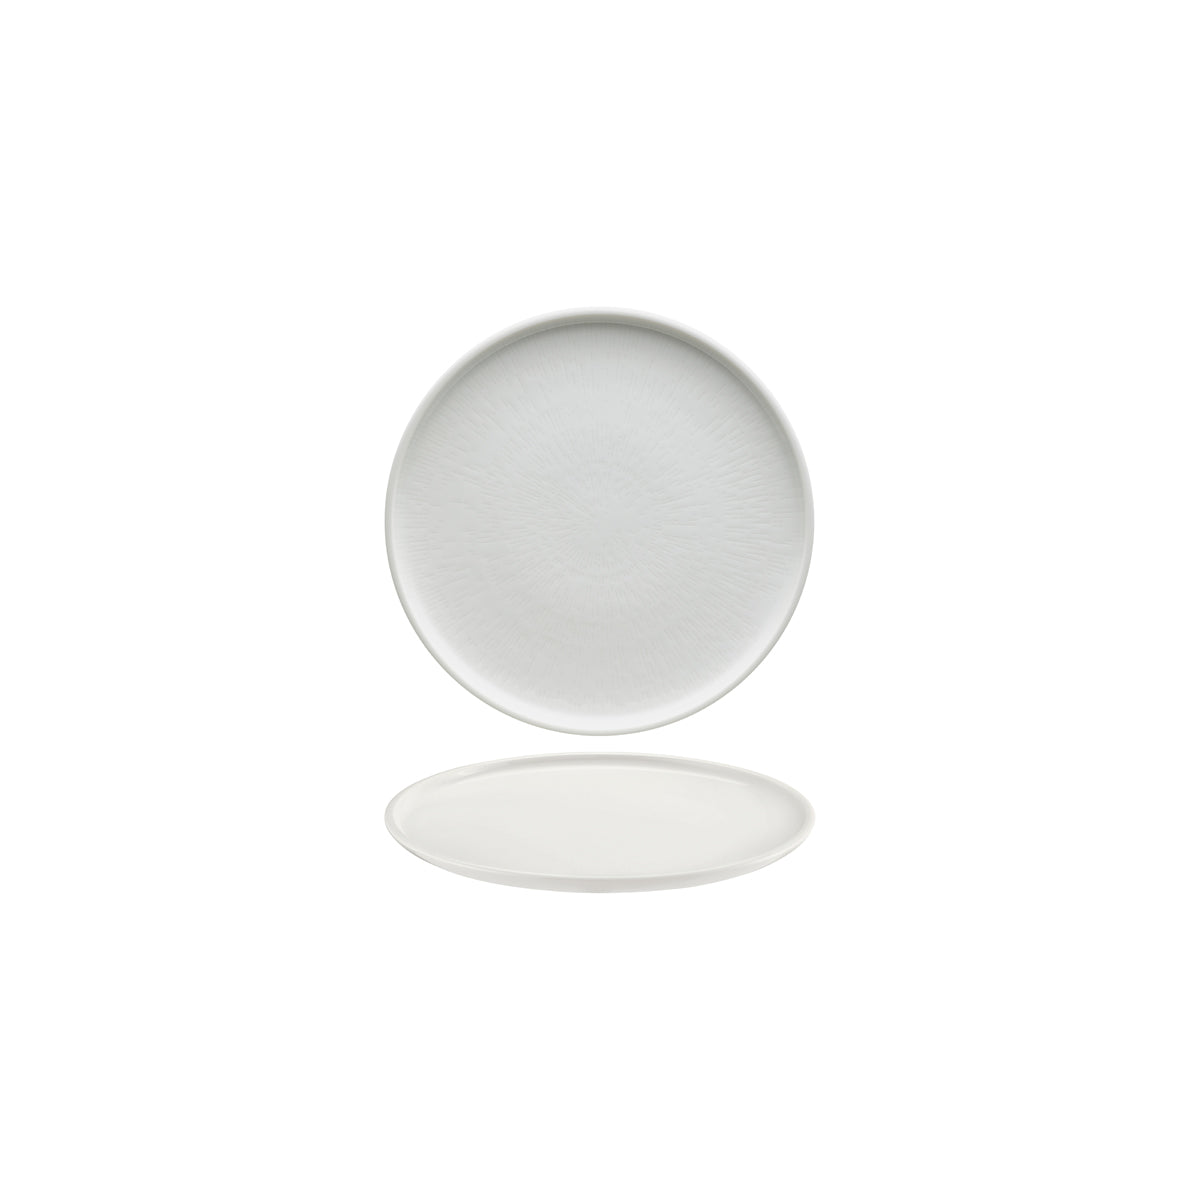 SH9251267 Schonwald Shiro Round Flat Coupe Plate Relief Design 170mm Tomkin Australia Hospitality Supplies